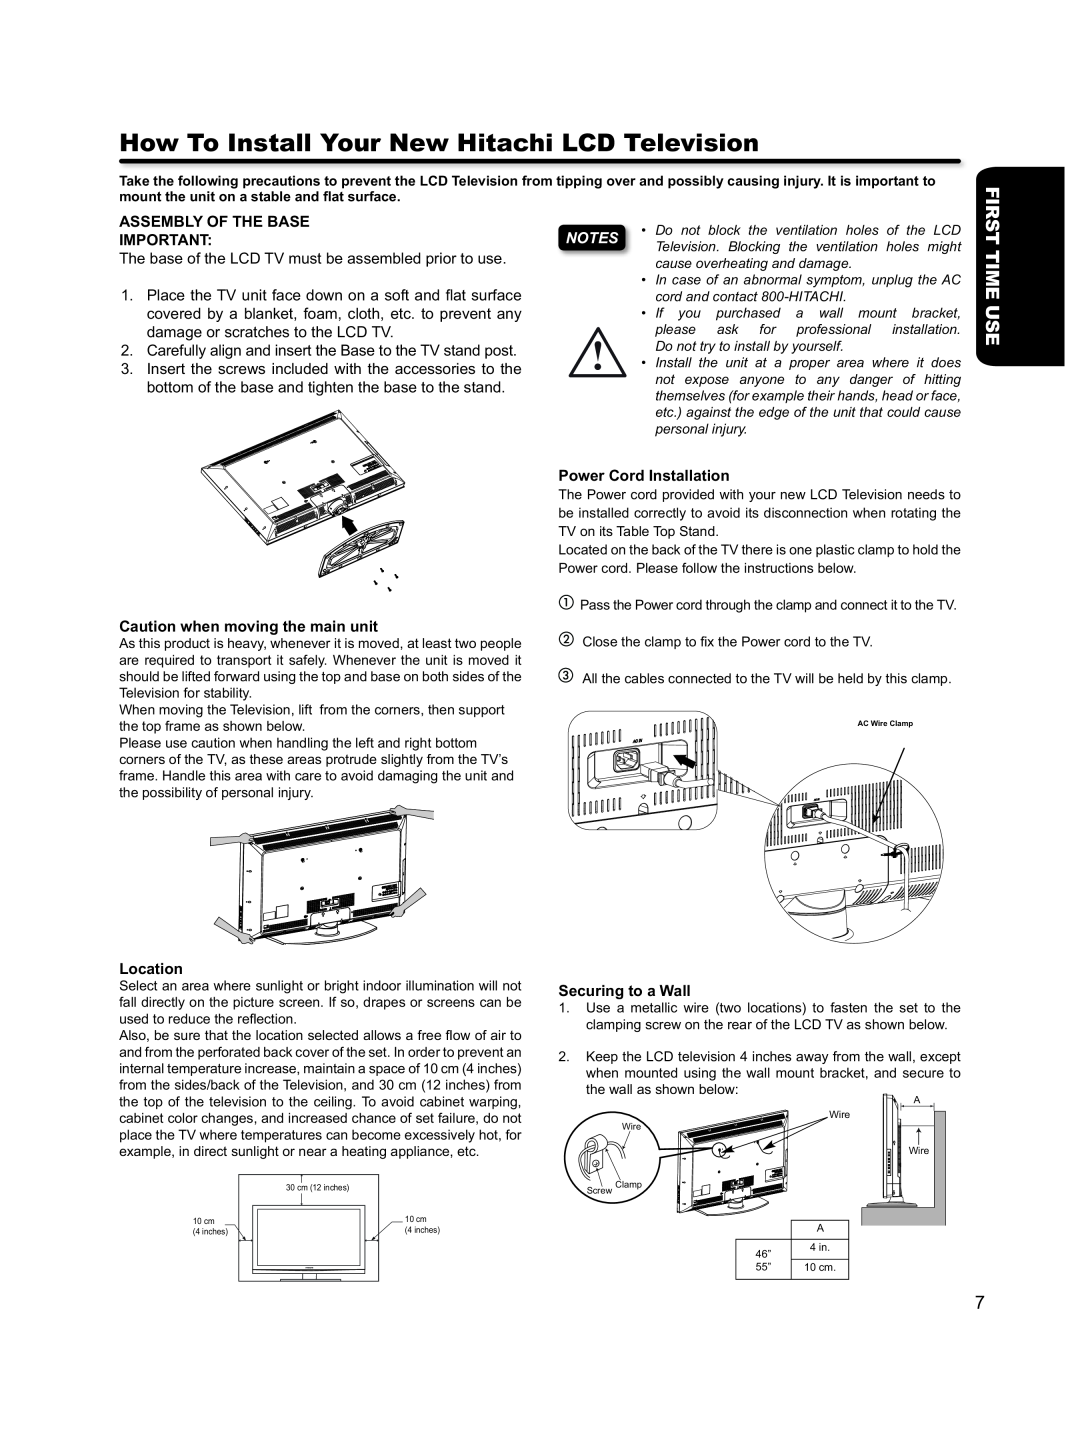 Hitachi L46S603 How To Install Your New Hitachi LCD Television, Time Use, Assembly Of The Base, Location 